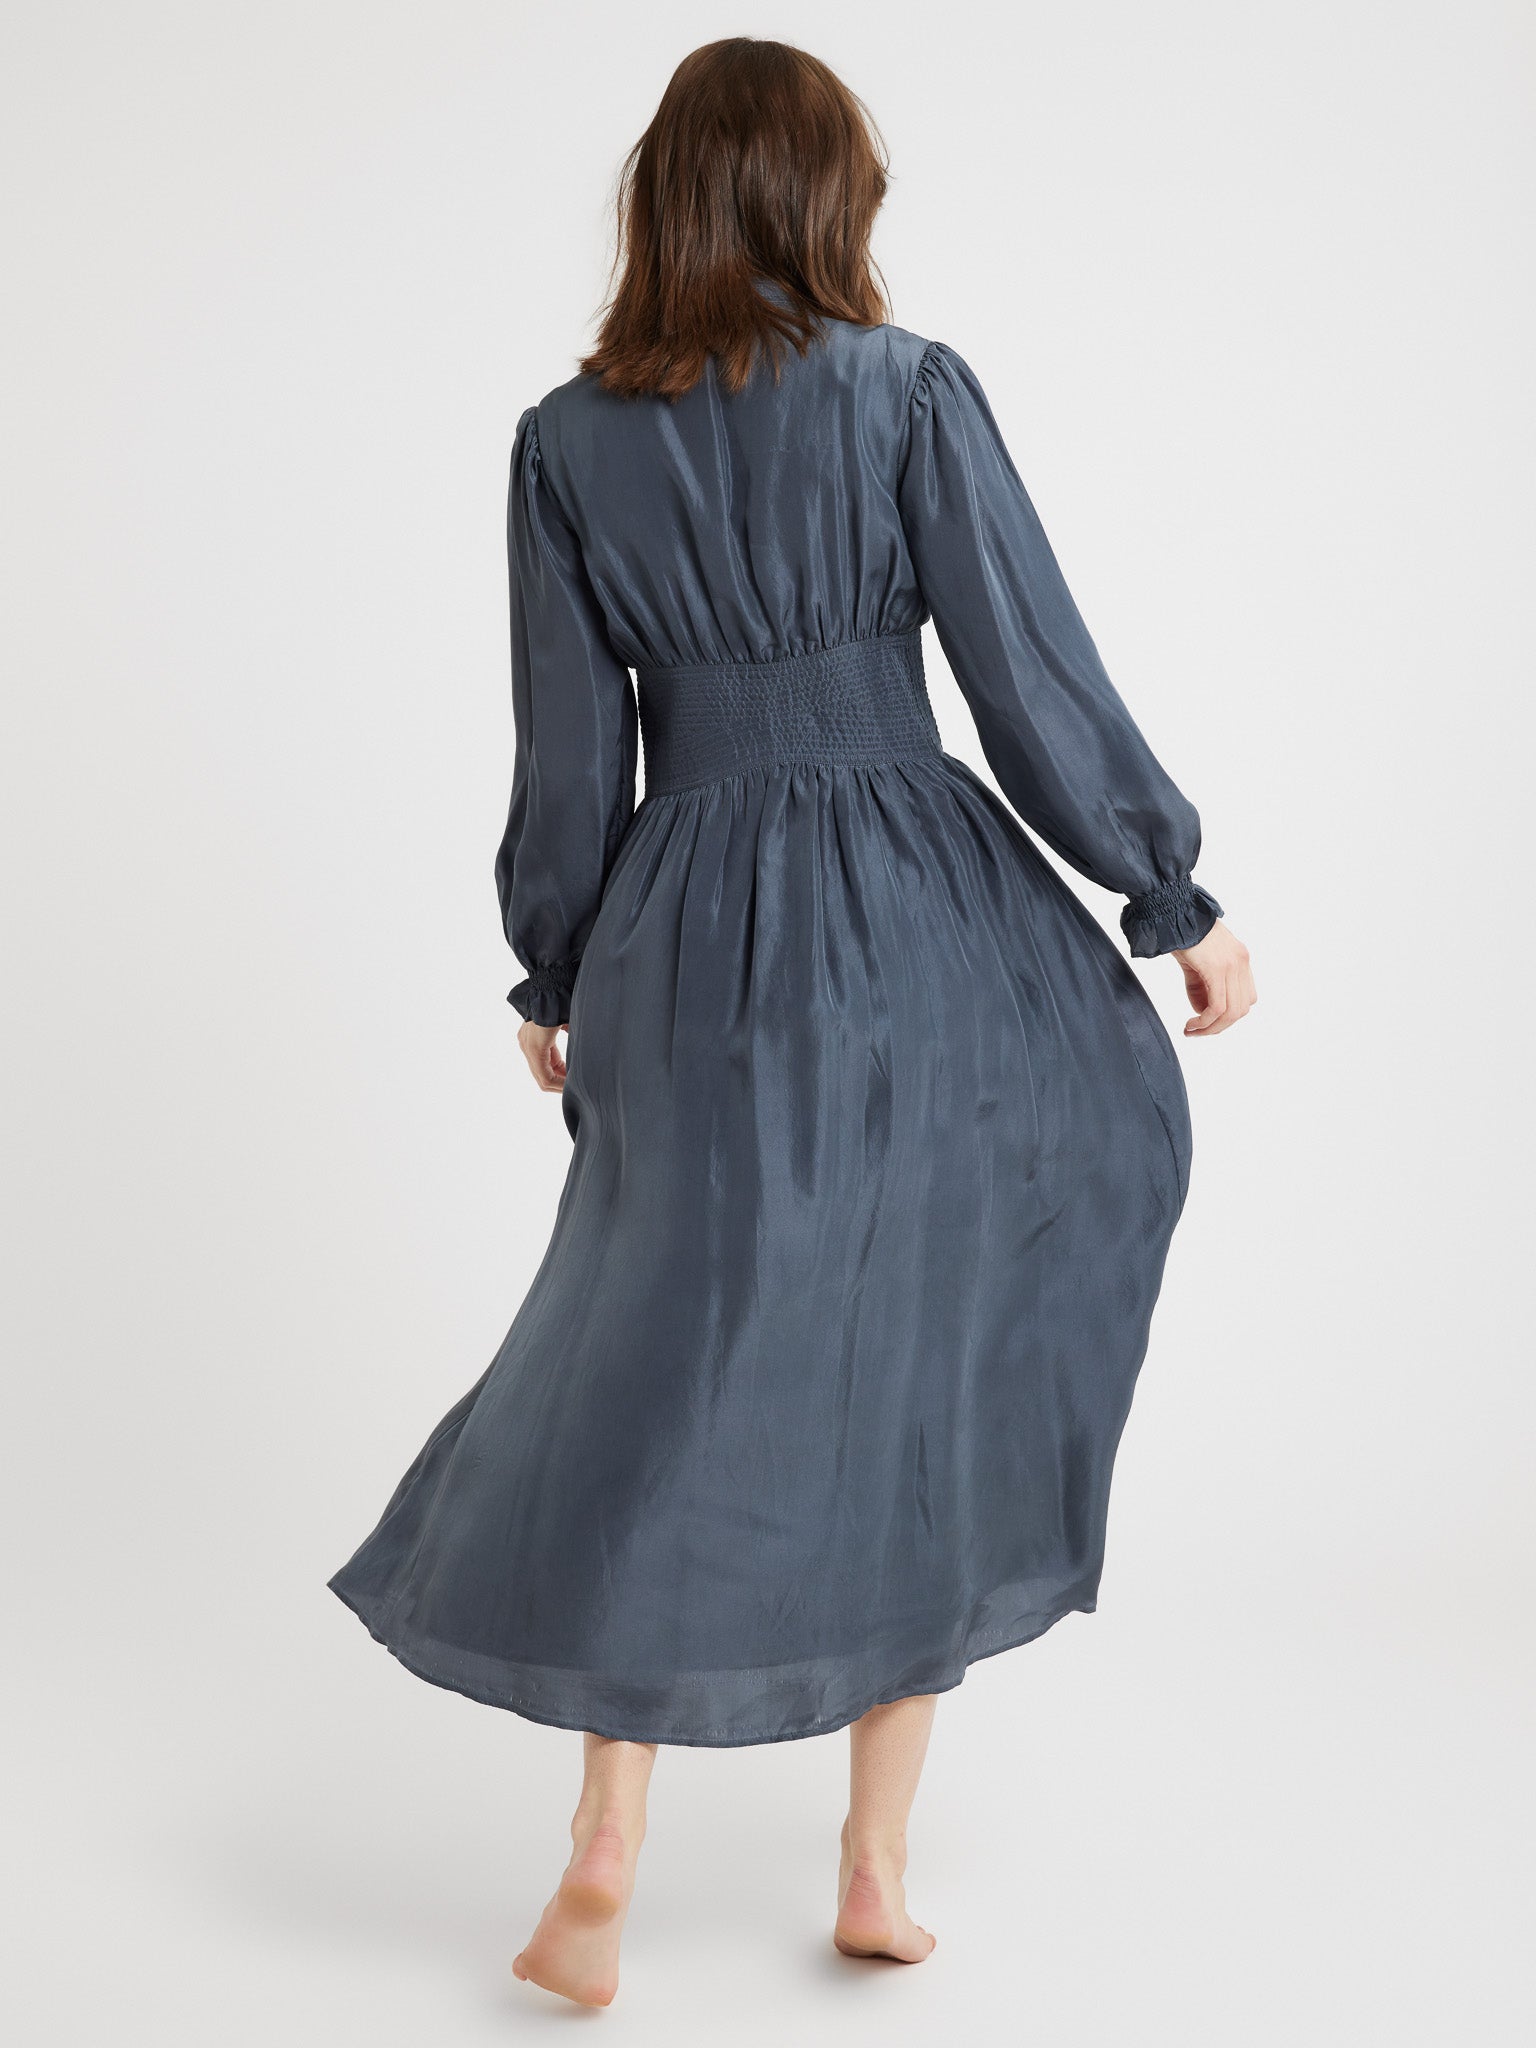 MILLE Clothing Anya Dress in Navy Washed Silk